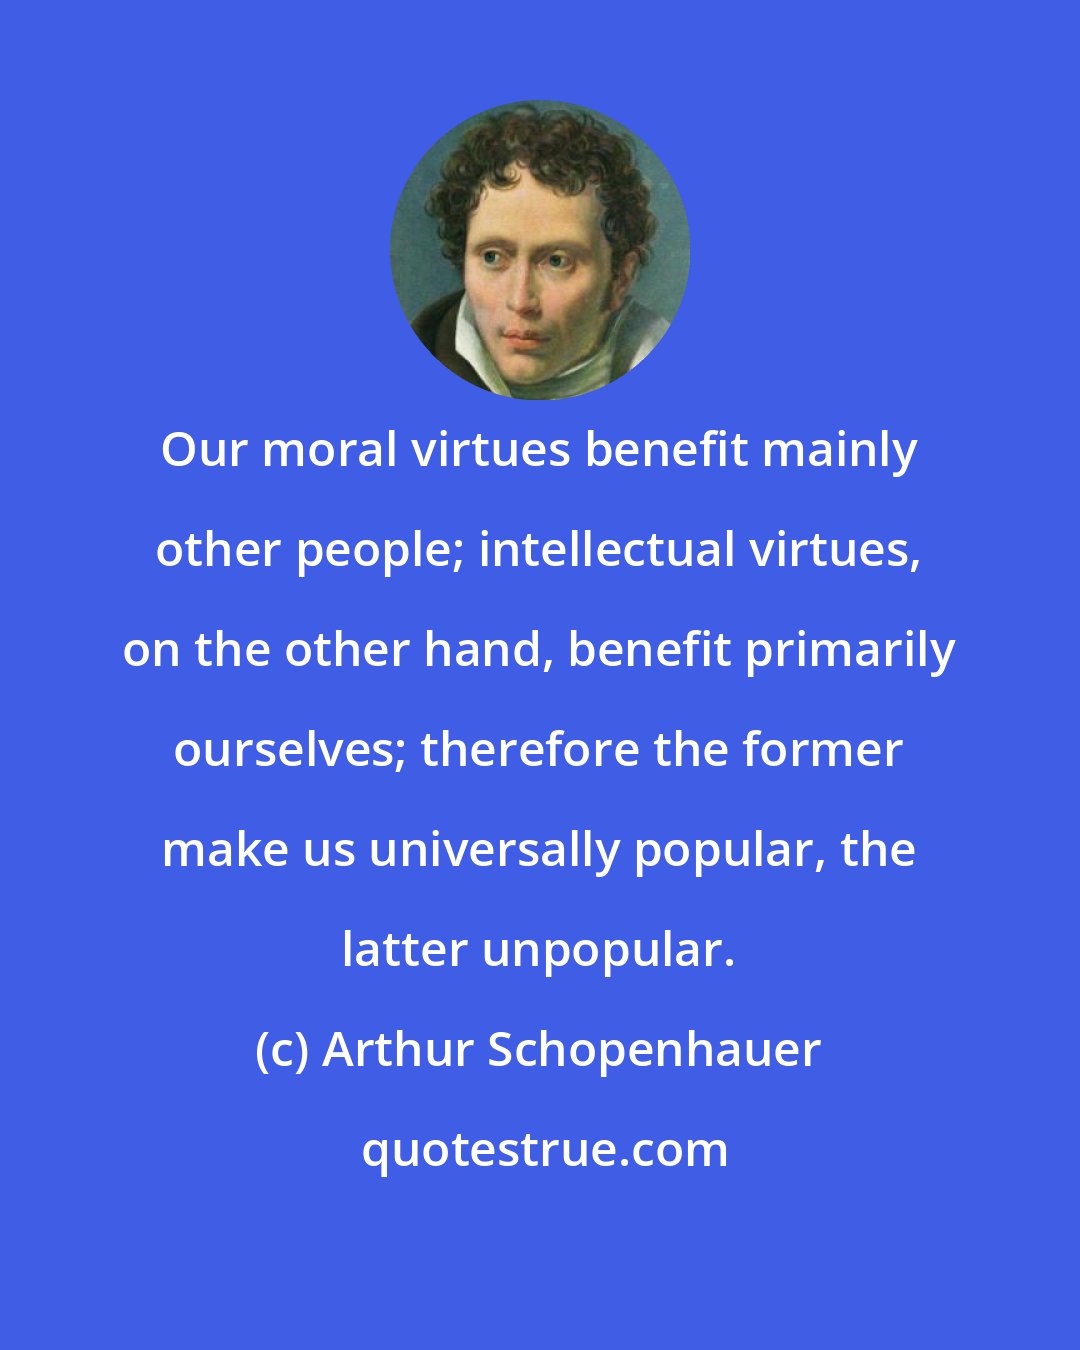 Arthur Schopenhauer: Our moral virtues benefit mainly other people; intellectual virtues, on the other hand, benefit primarily ourselves; therefore the former make us universally popular, the latter unpopular.